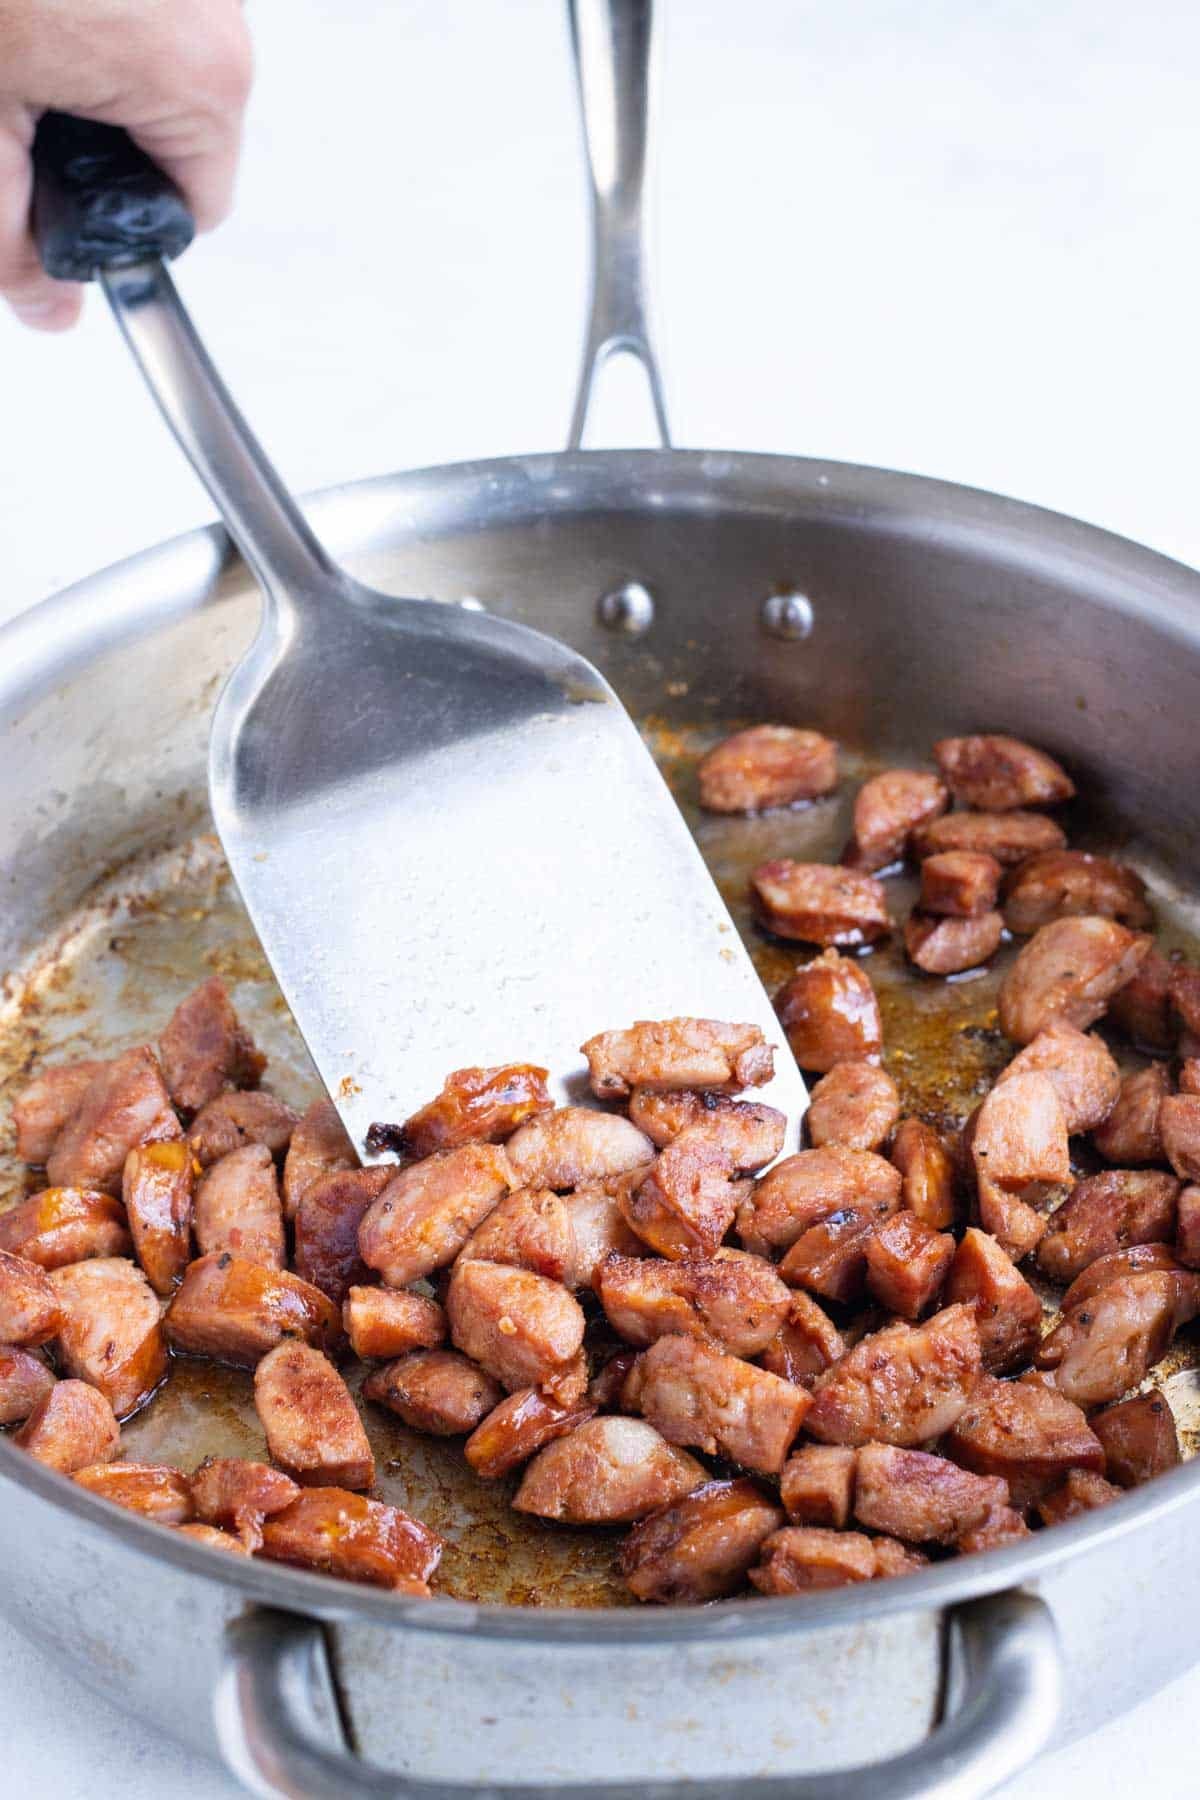 Sausage is cooked in a skillet.